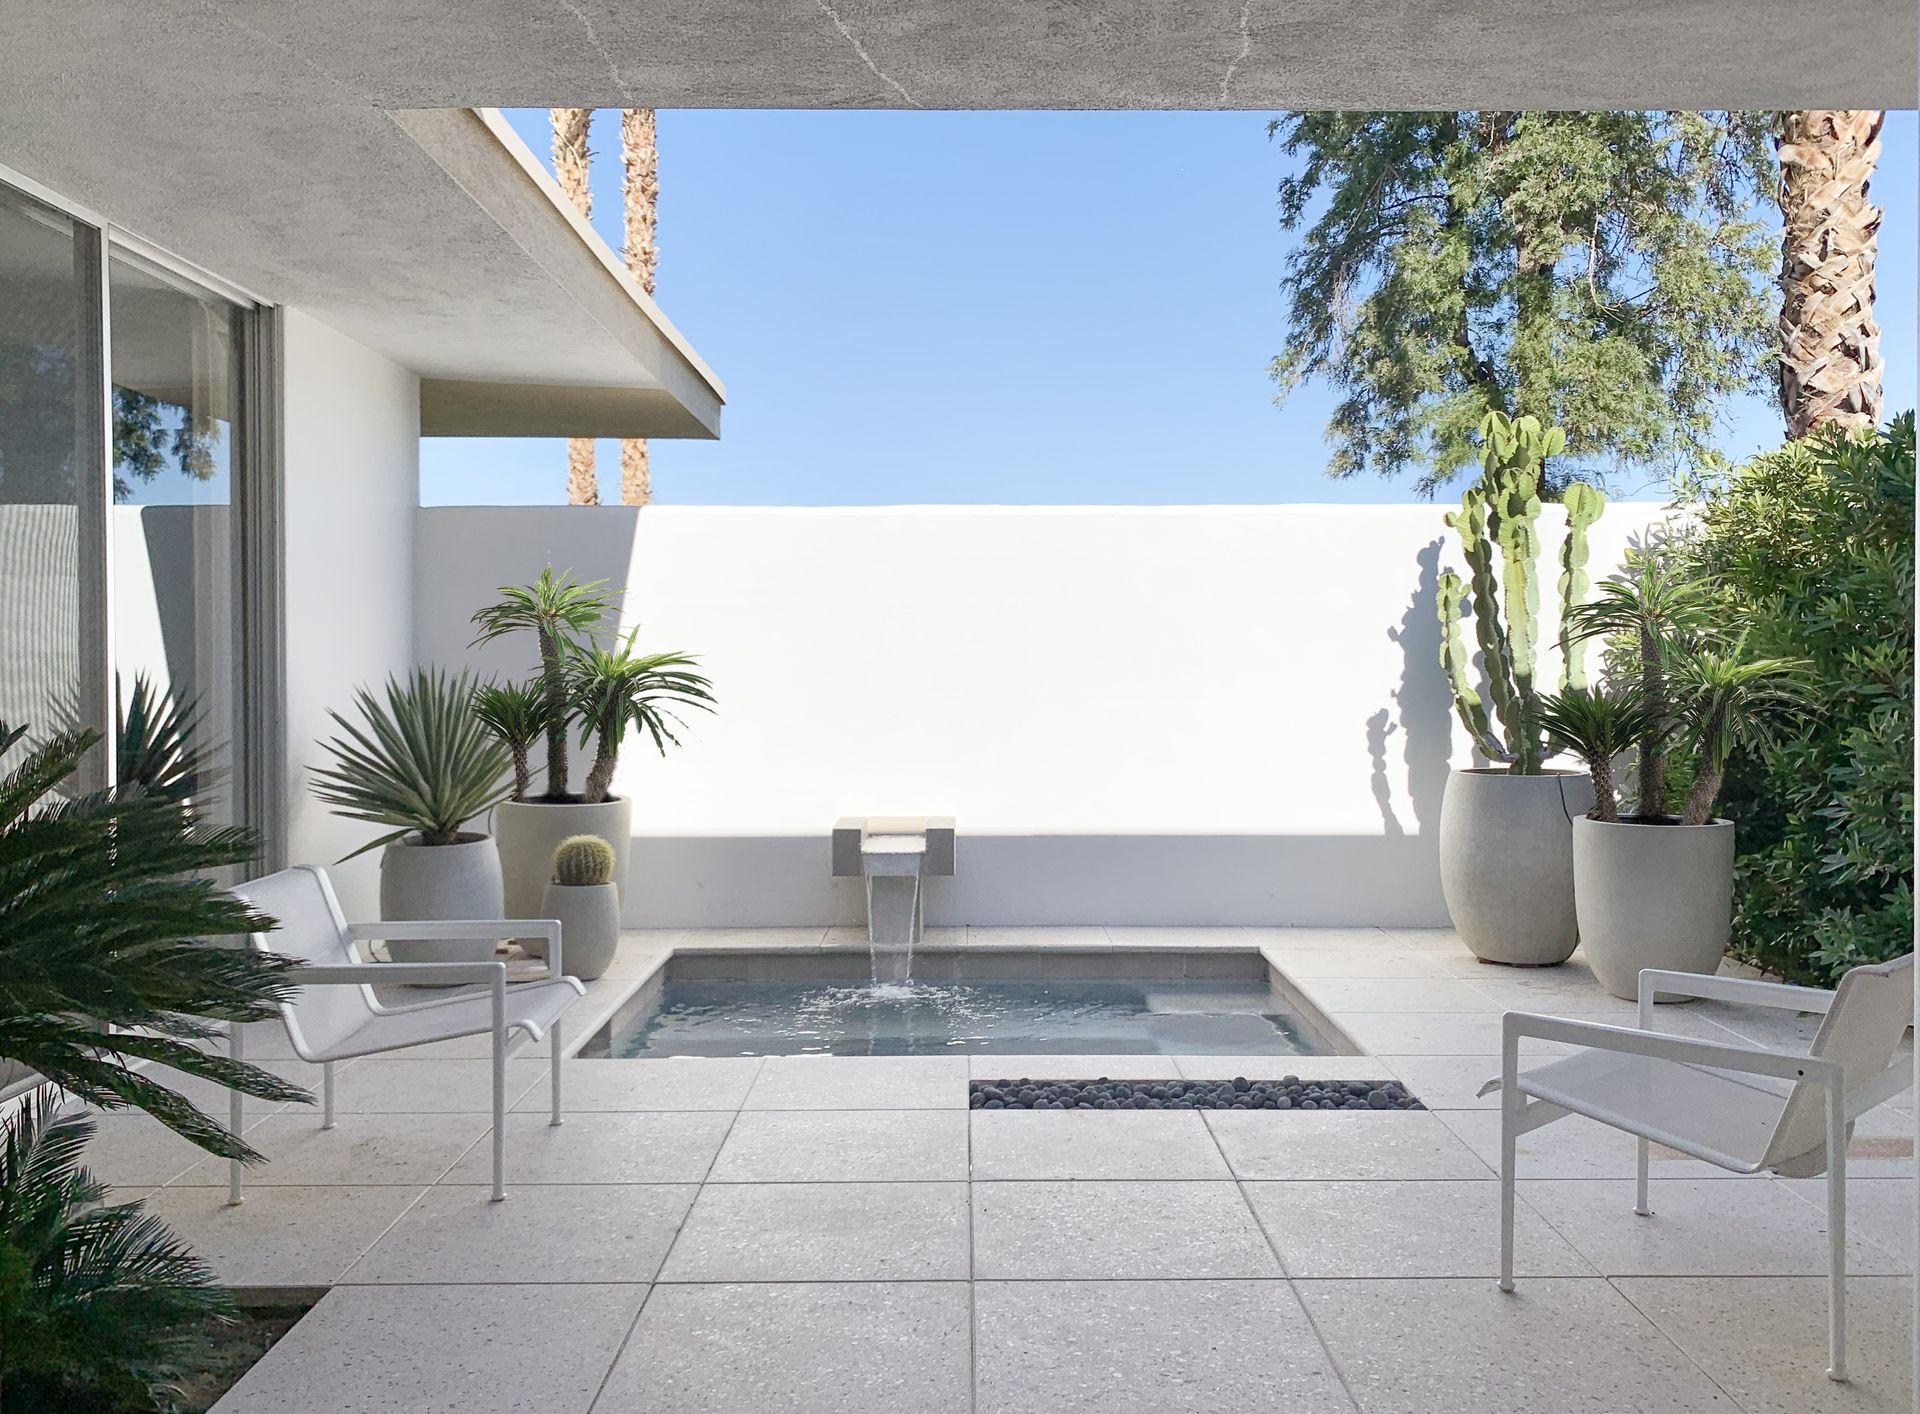 Formarch launches Palm Springs house during Modernism Week | Wallpaper